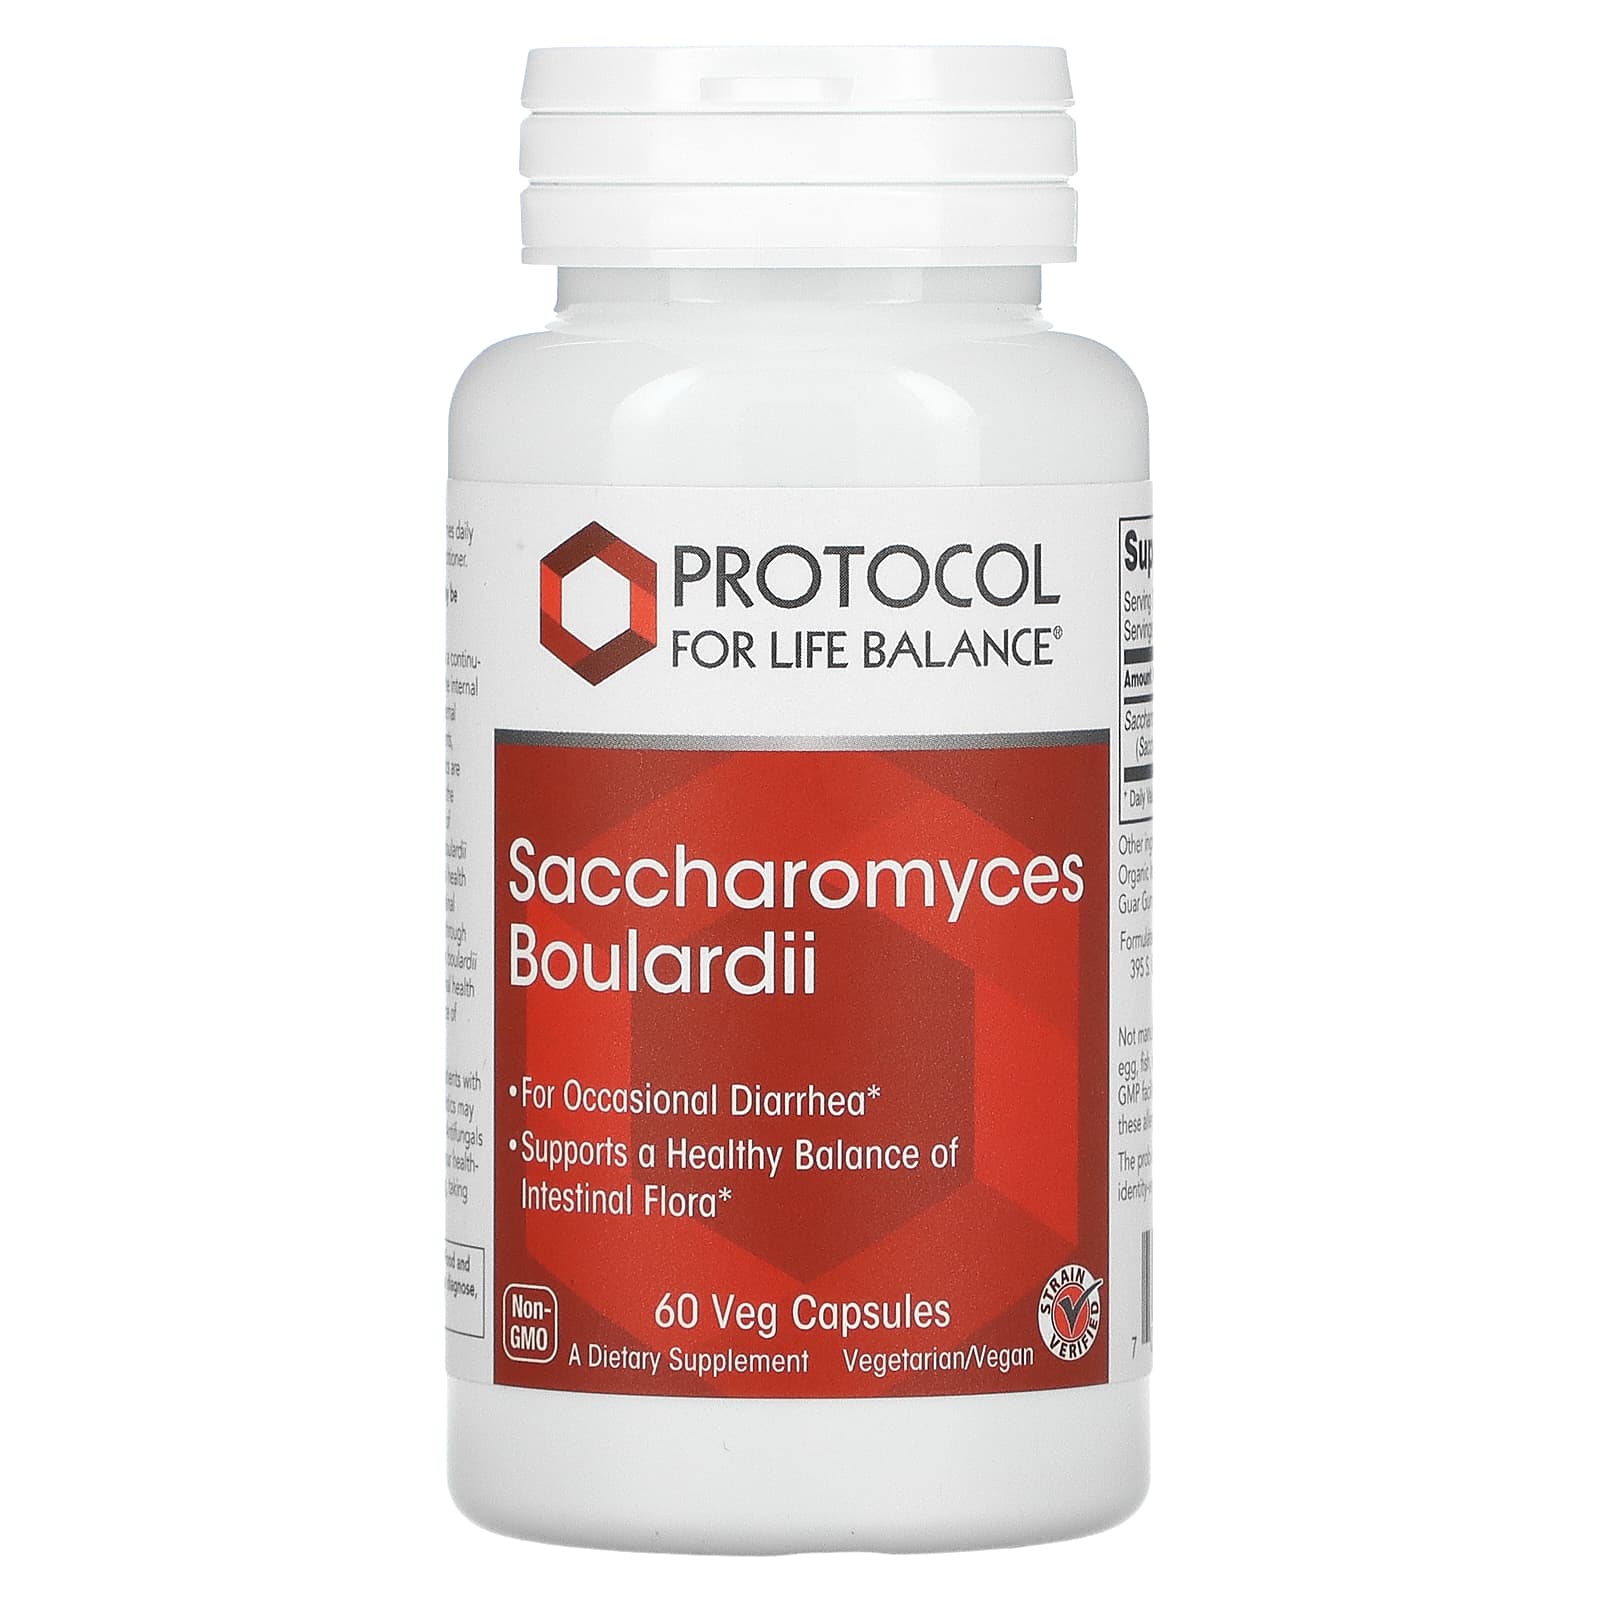 Now Foods Saccharomyces Boulardii (Probiotic) 60 Vegetarian Capsules - Low  Price, Check Reviews and Suggested Use